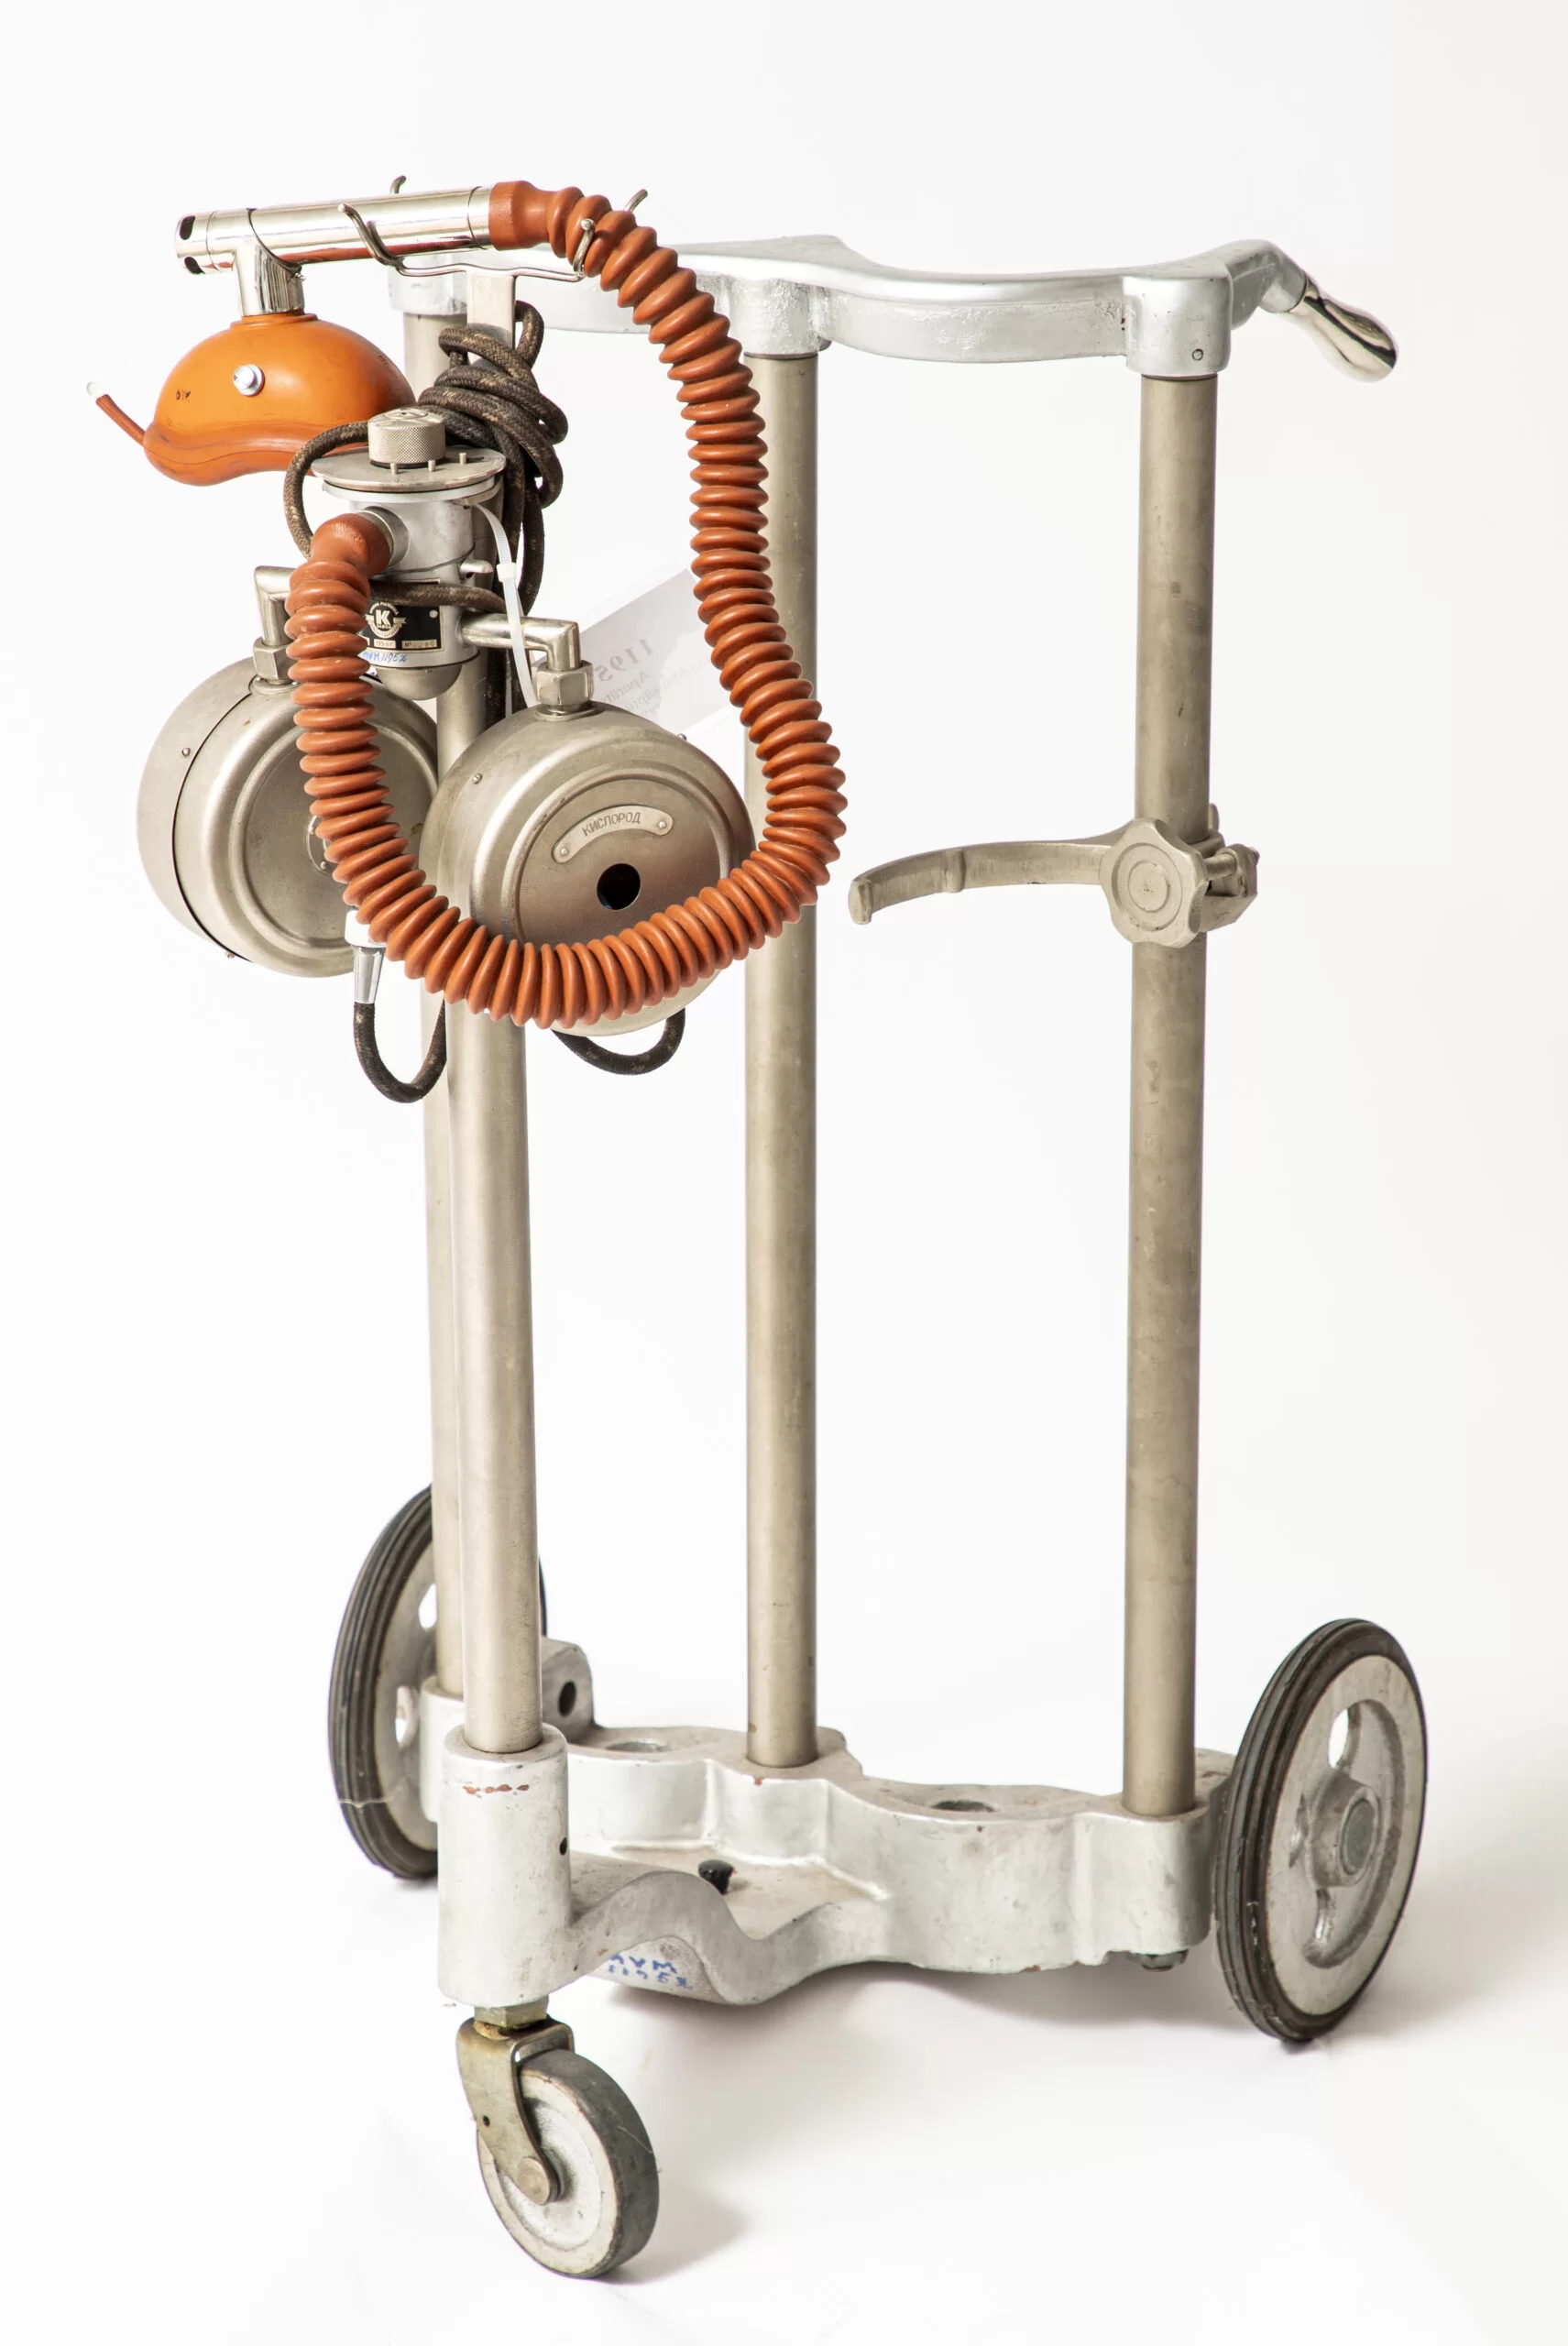 Childbirth labour pain-mitigation apparatus on three wheels, with longer metal structures and a face mask that is placed over the mouth and inhaled.